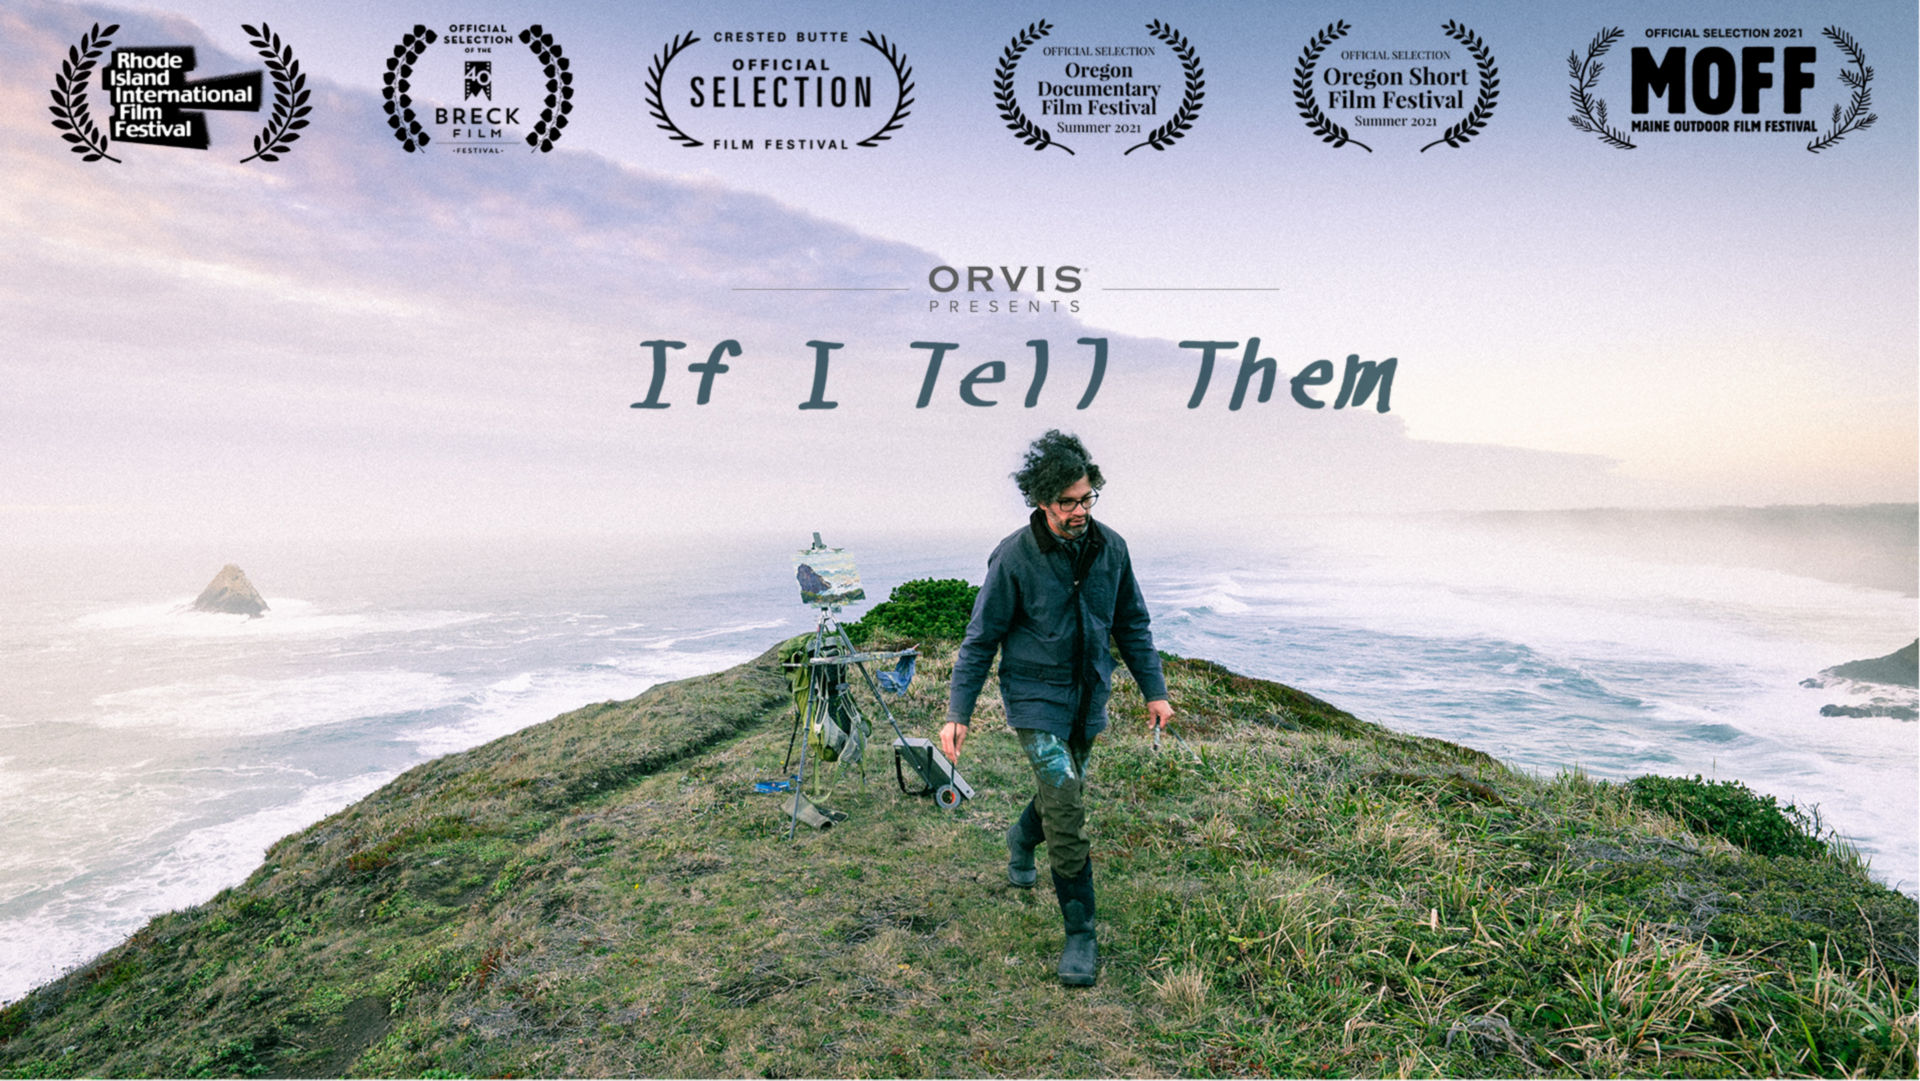 A movie Poster for If I Tell Them, James Sampsel walking away from the edge of a cliff